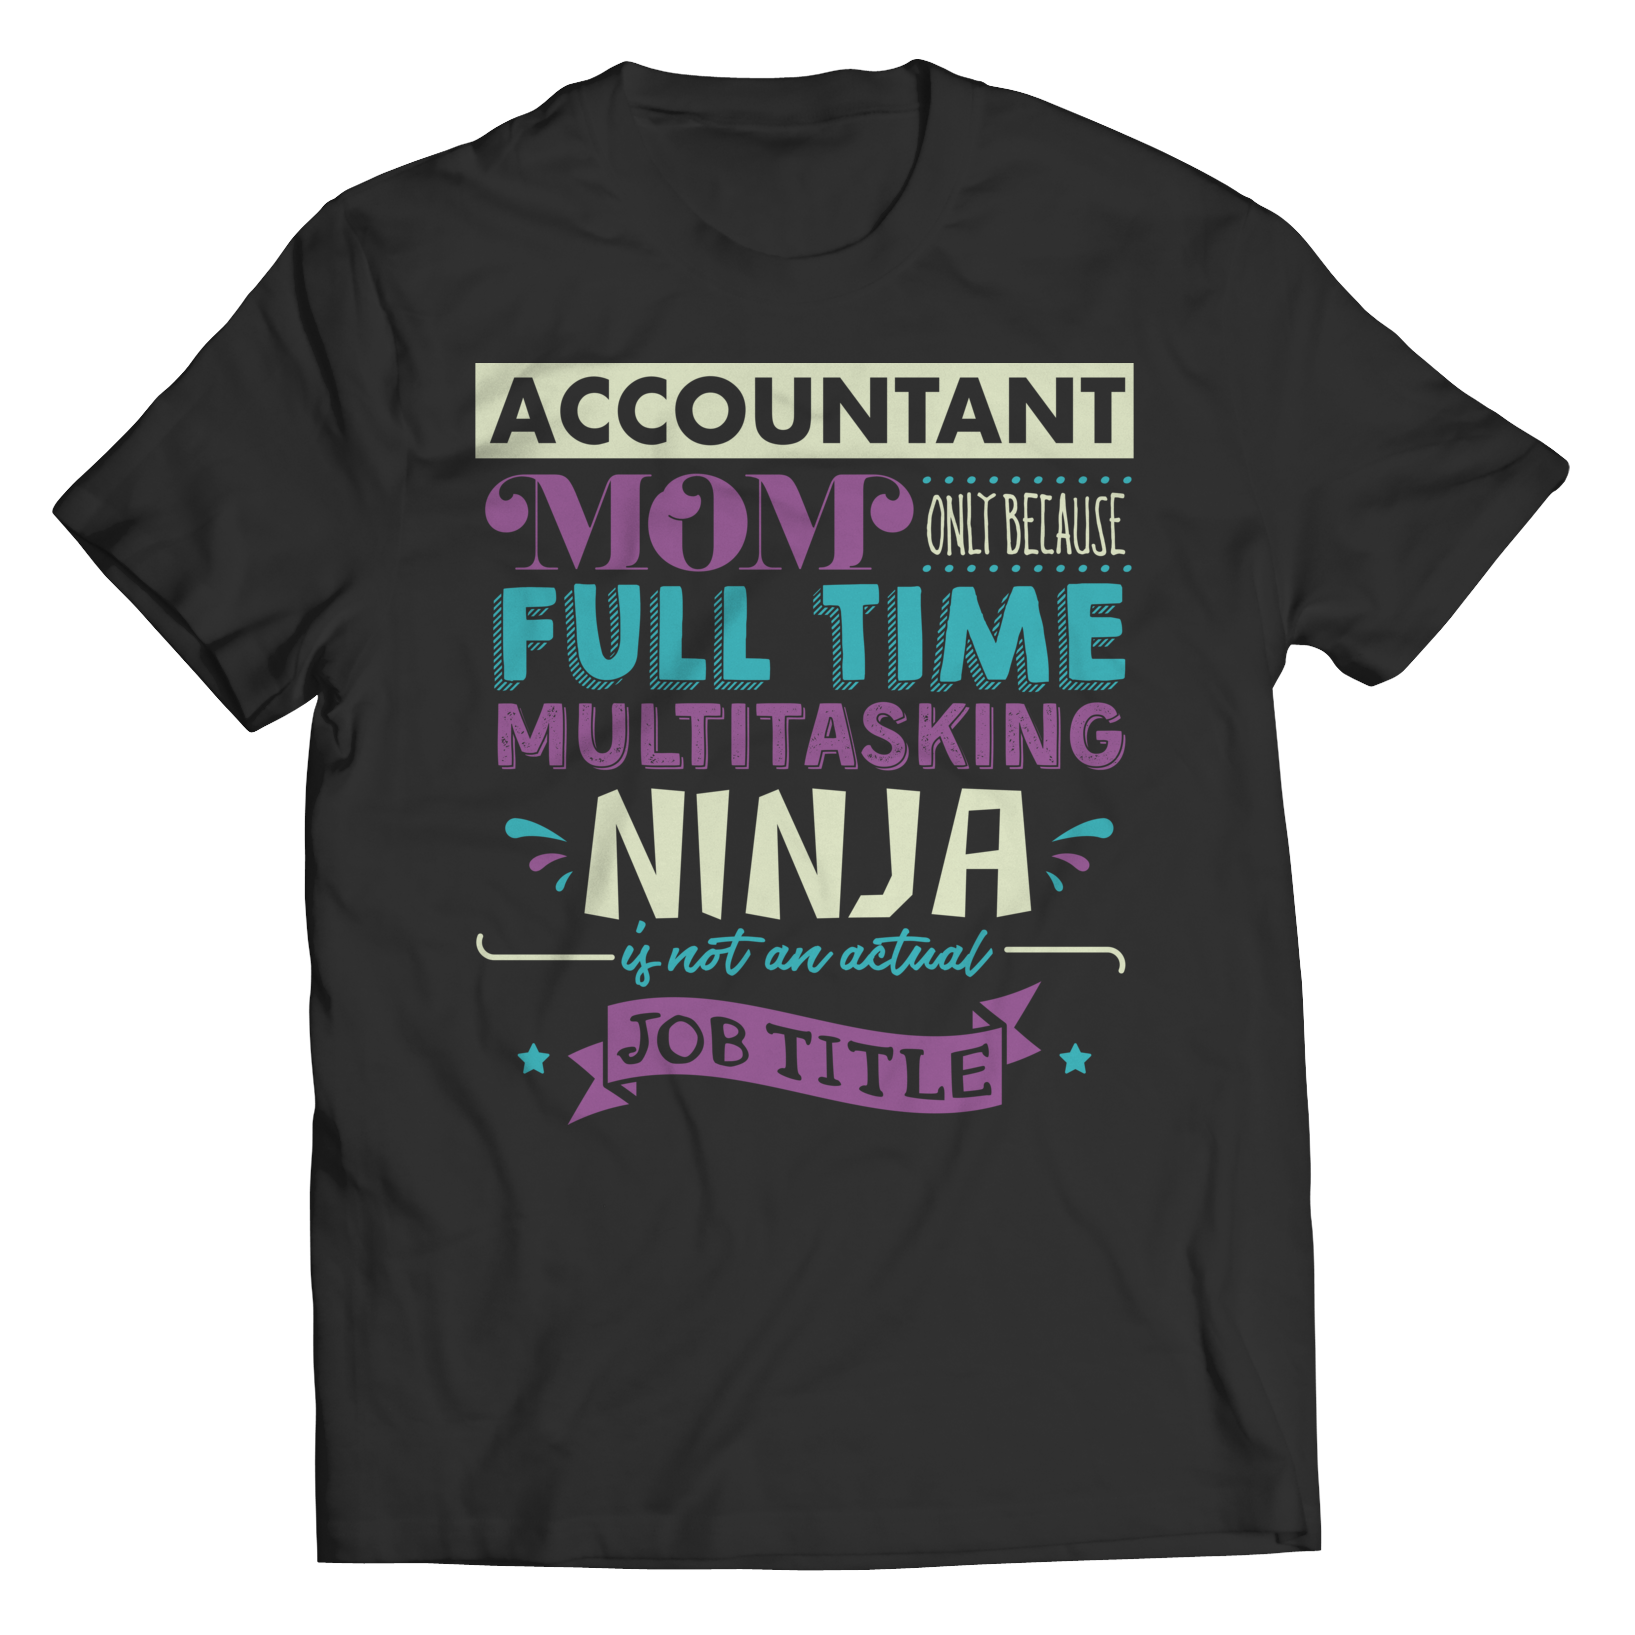 Limited Edition - Accountant Mom, Only Because Full Time Multitasking Ninja Is Not An Actual Job Title Shirt